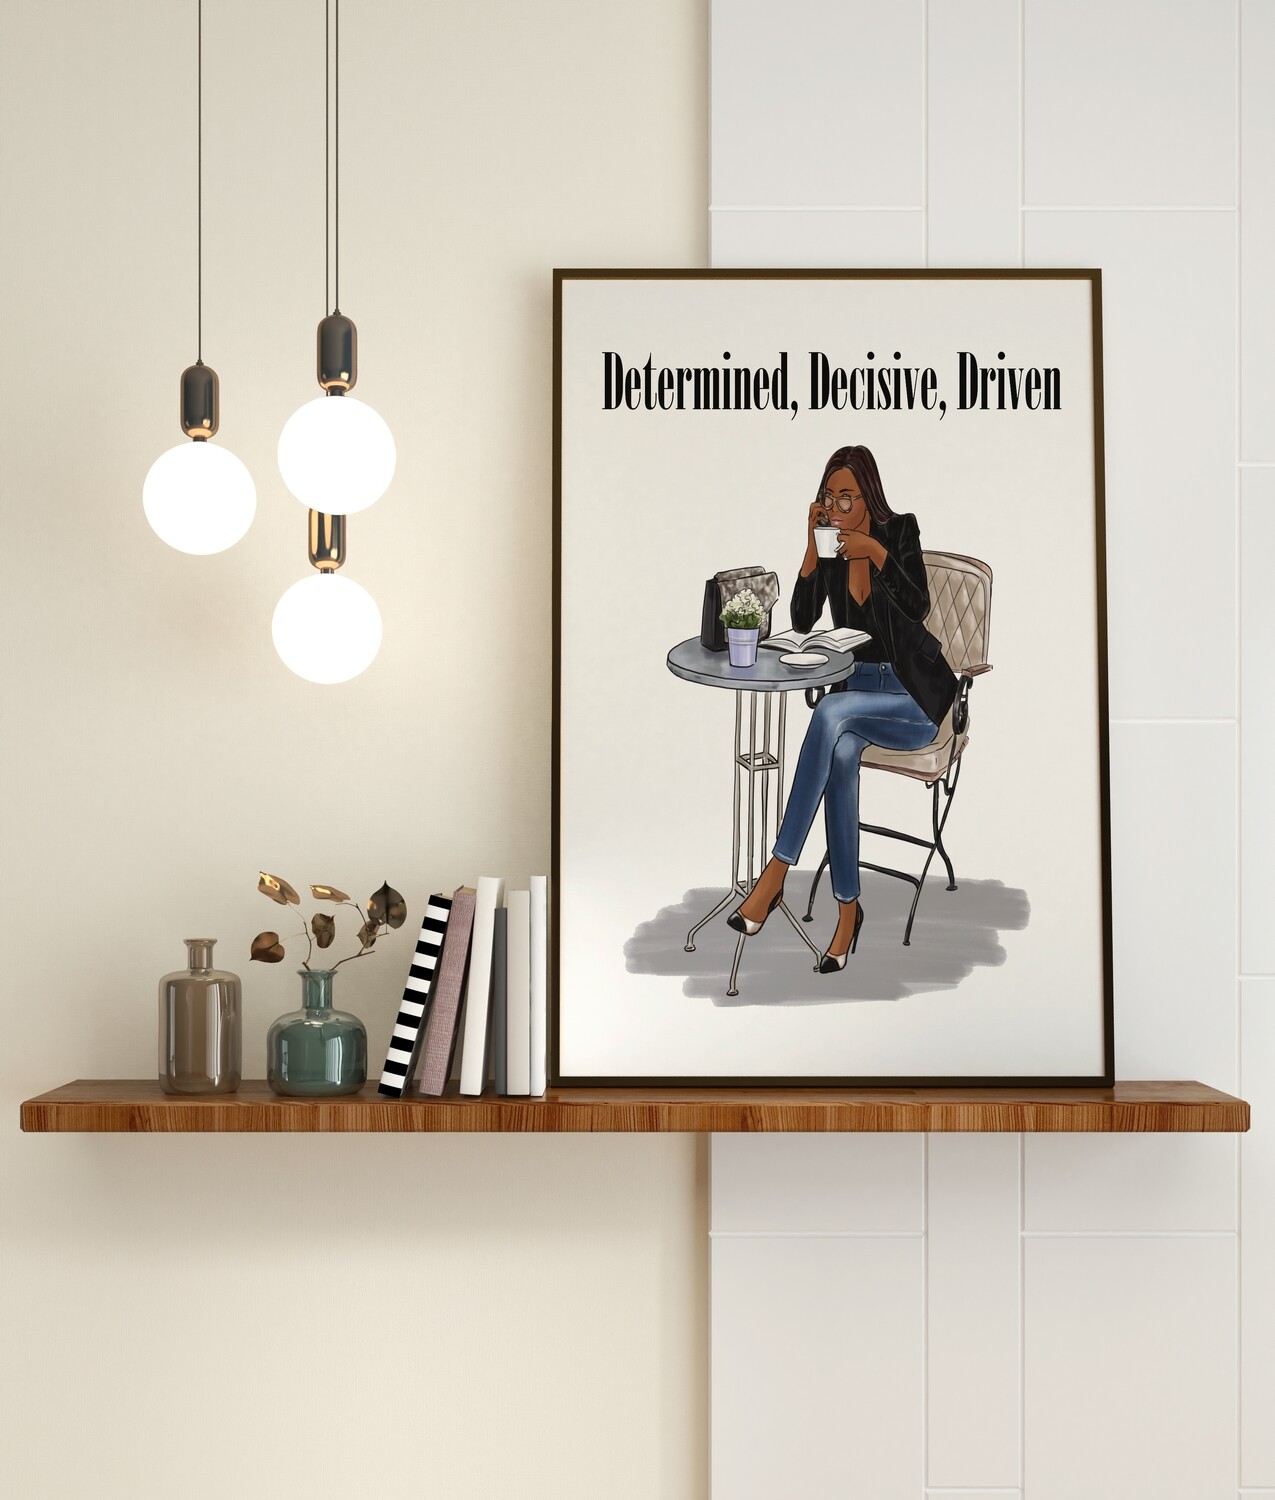 Determined, Decisive, Driven Motivating wall art brown skinned woman